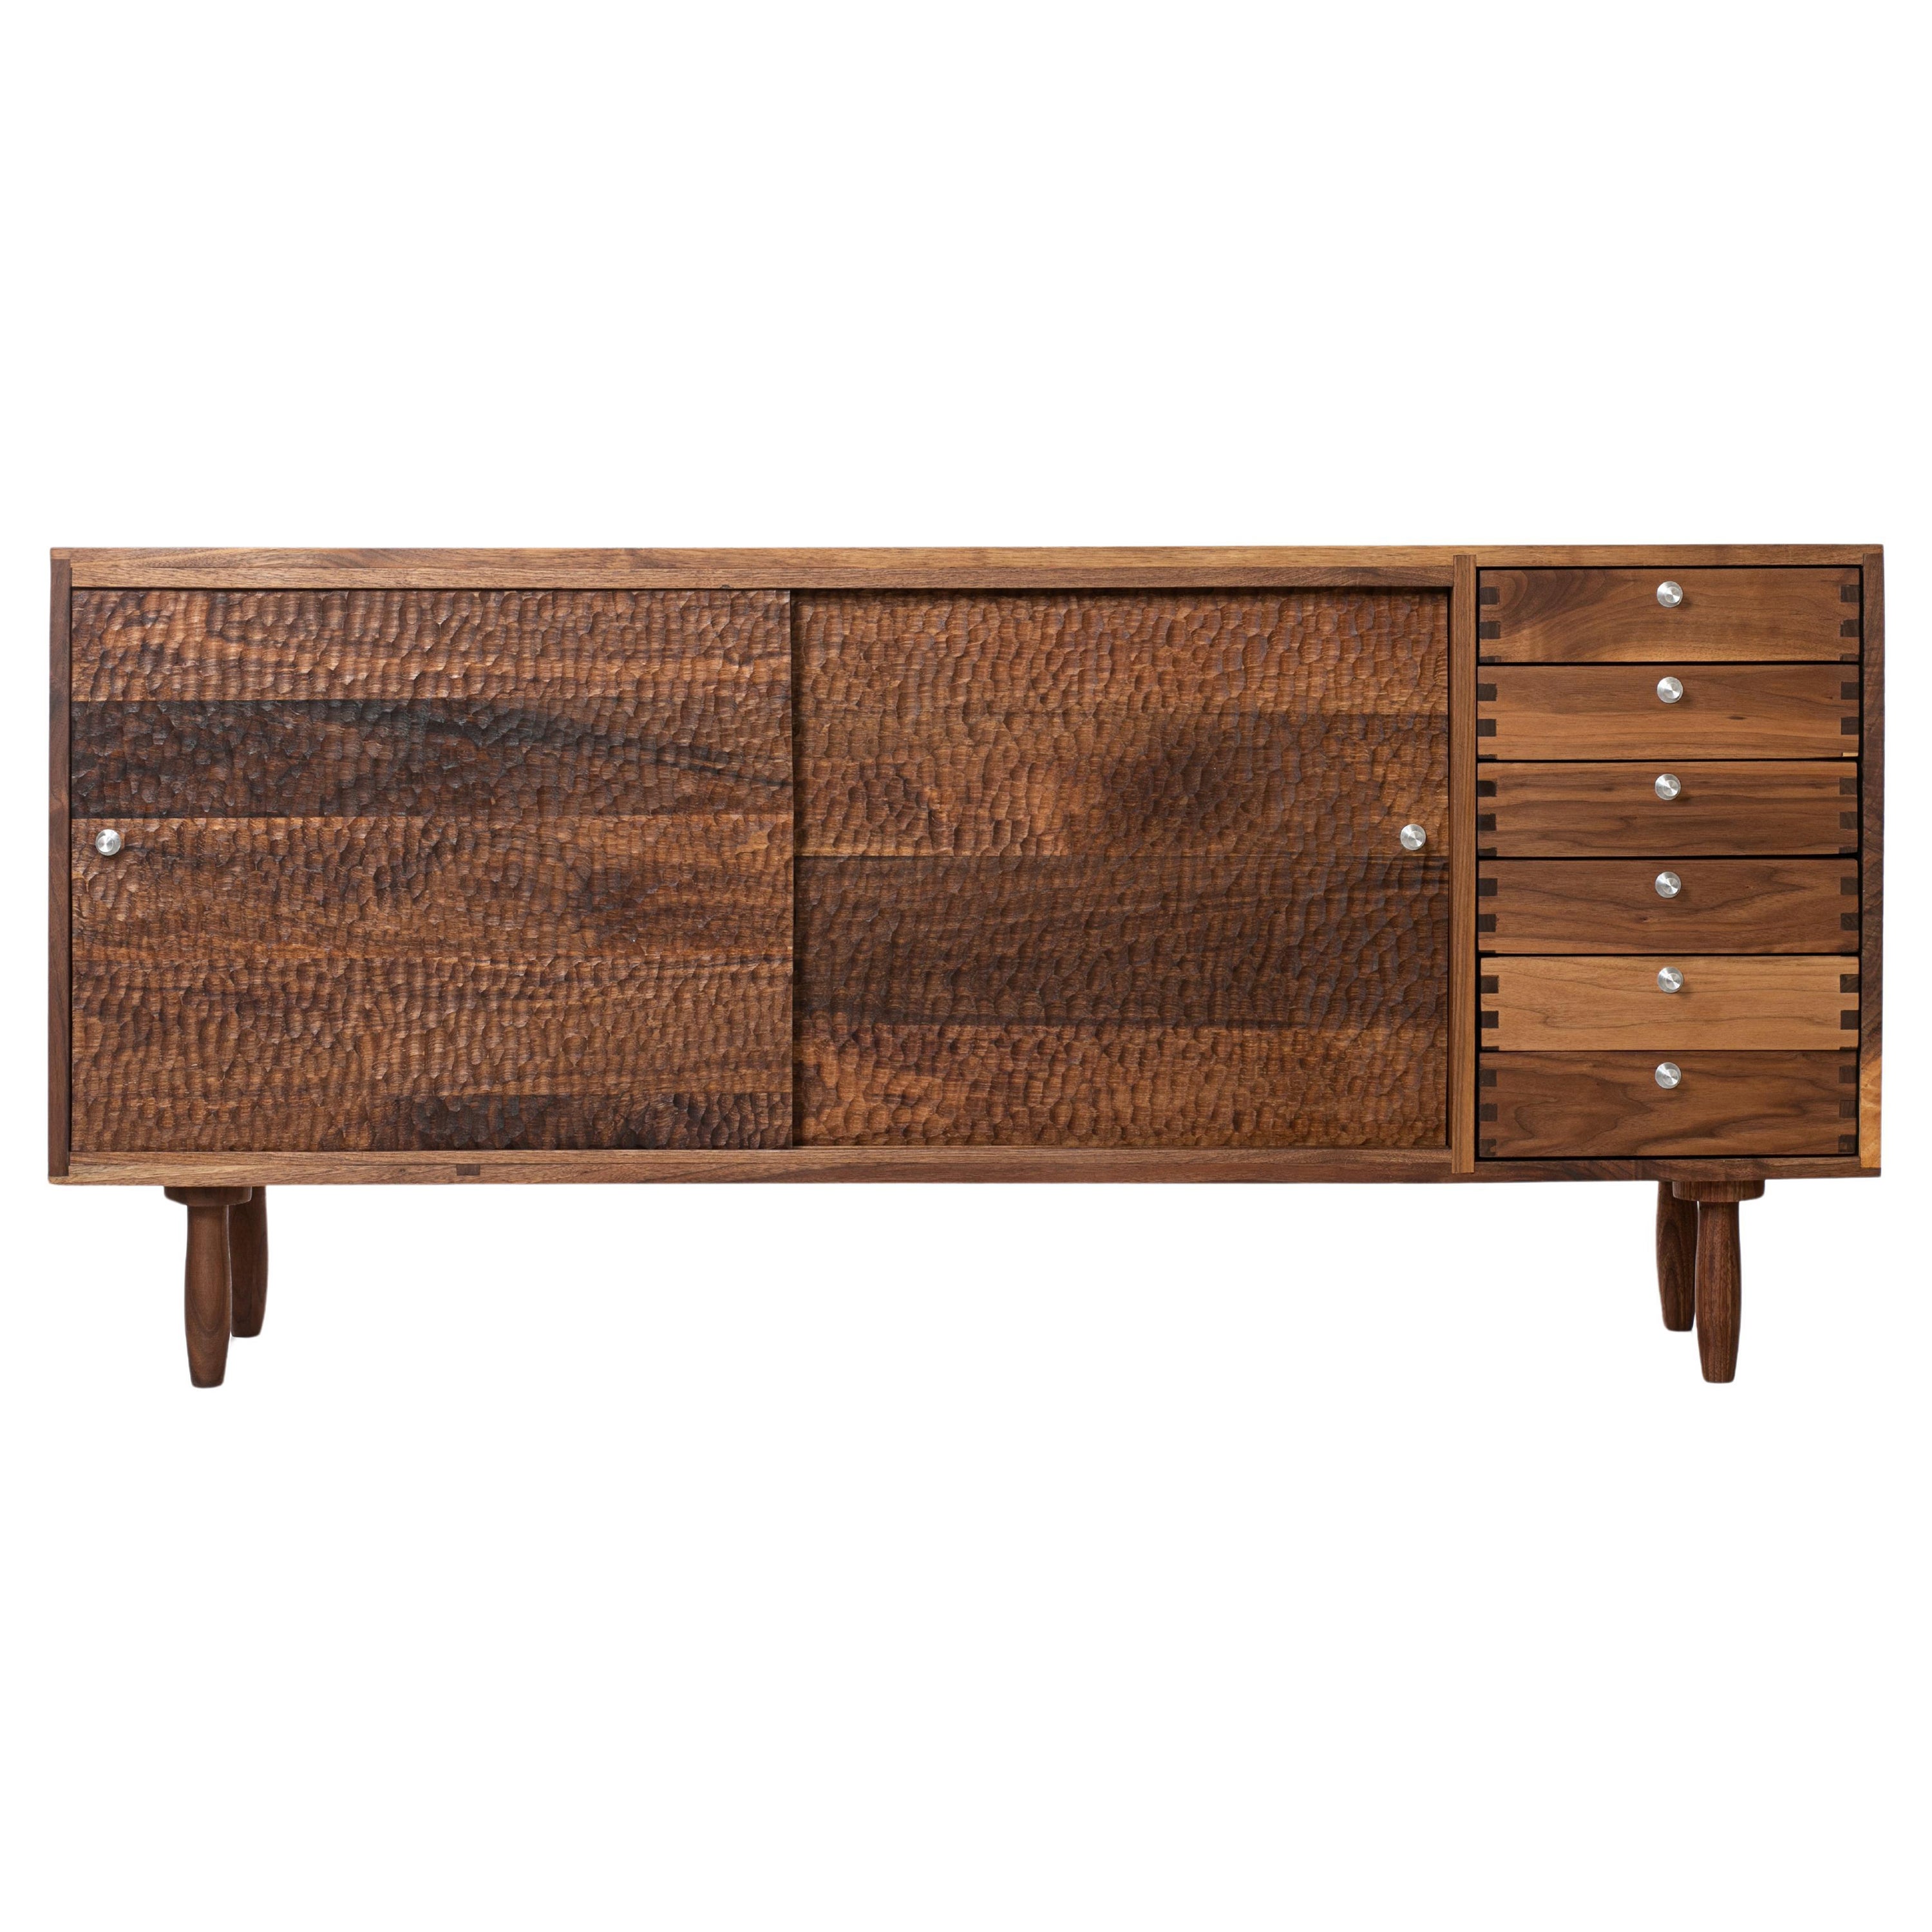 Chip carved walnut cabinet sideboard with sliding doors by Michael Rozell - new  For Sale